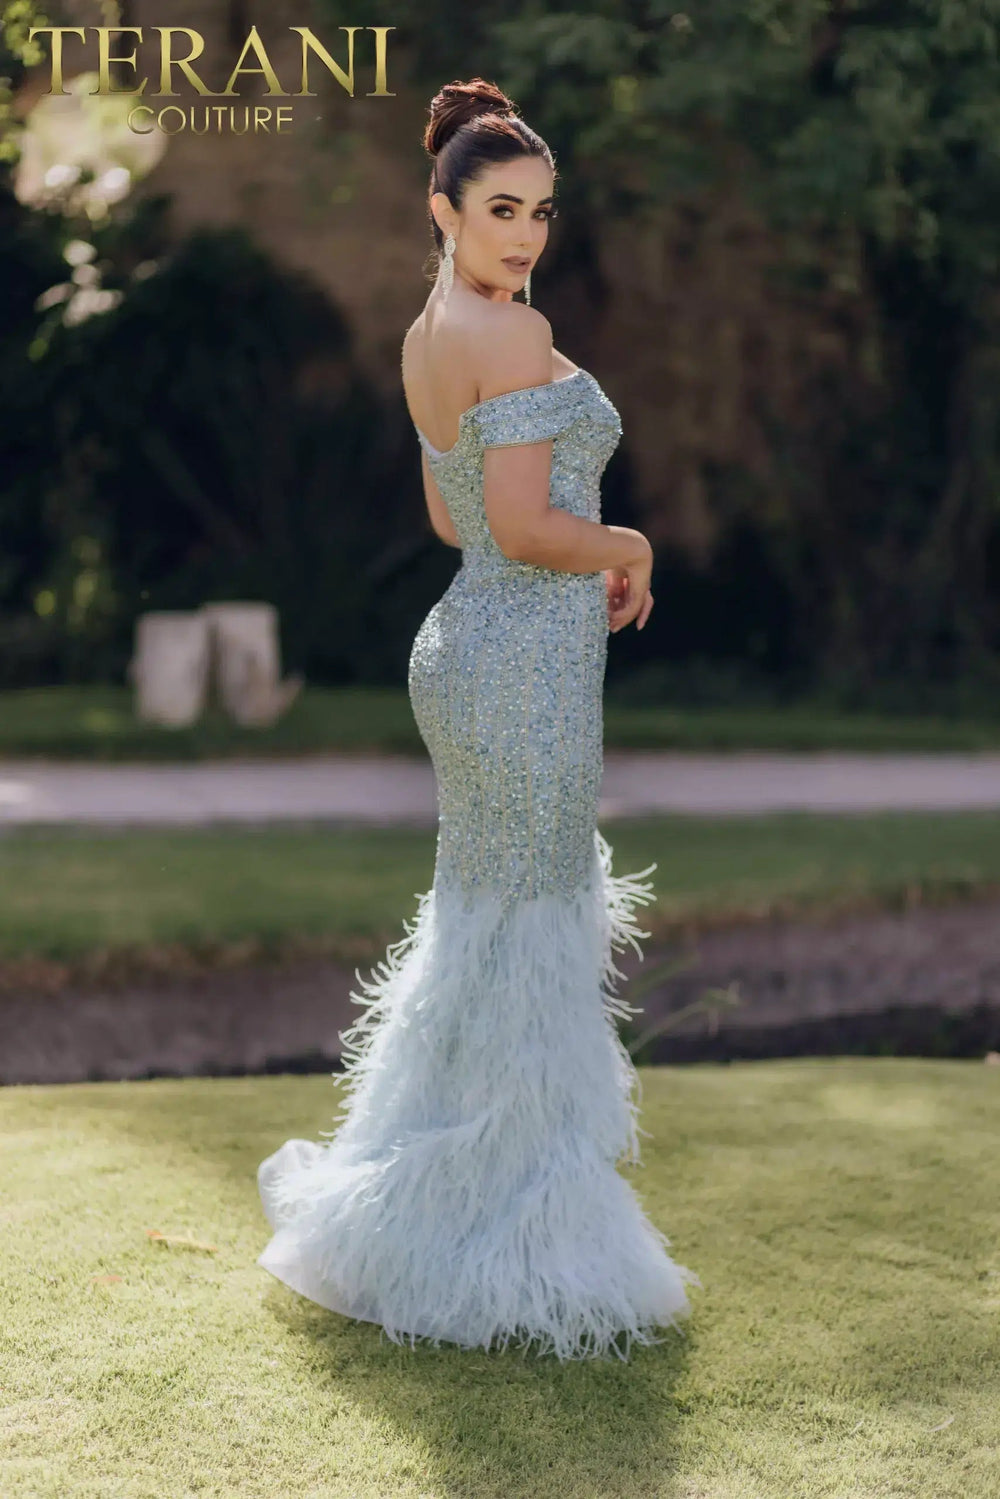 terani couture evening dress Terani Couture 232GL1478 Mermaid Off-Shoulder Beaded Bodice Feathered Hem Long Dress